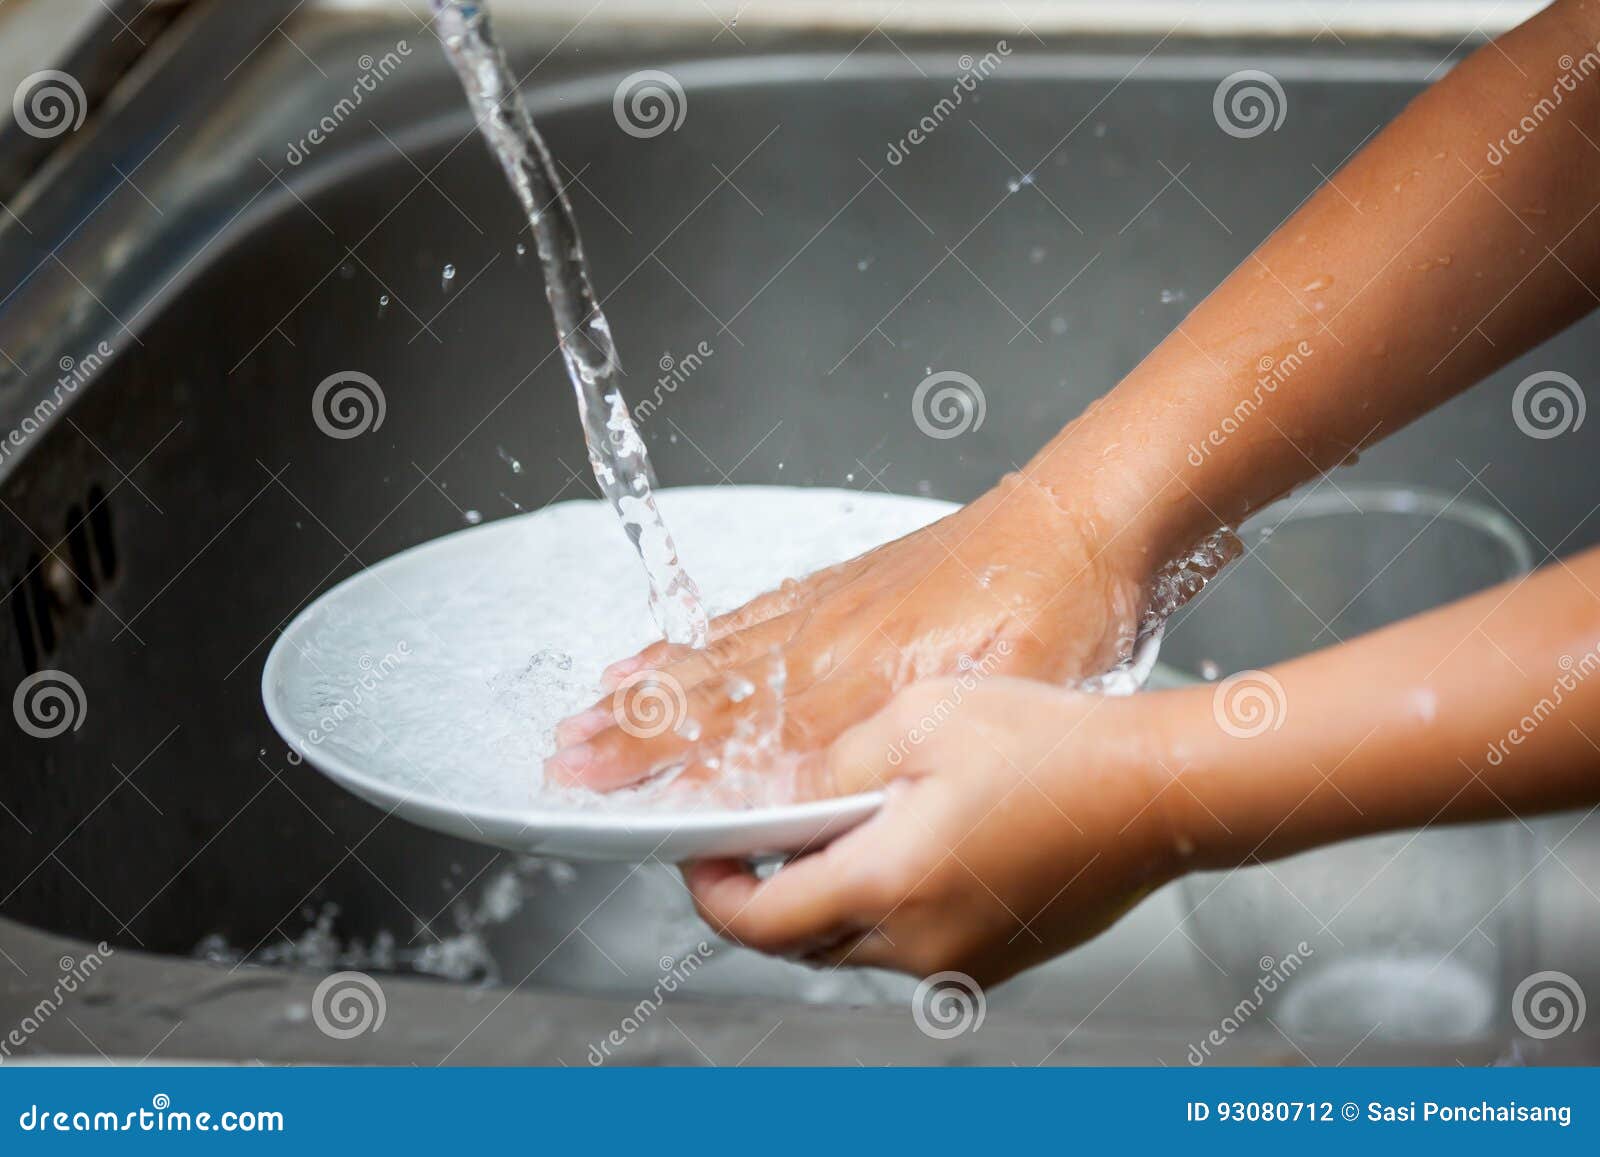 child hand washing dishes over the sink